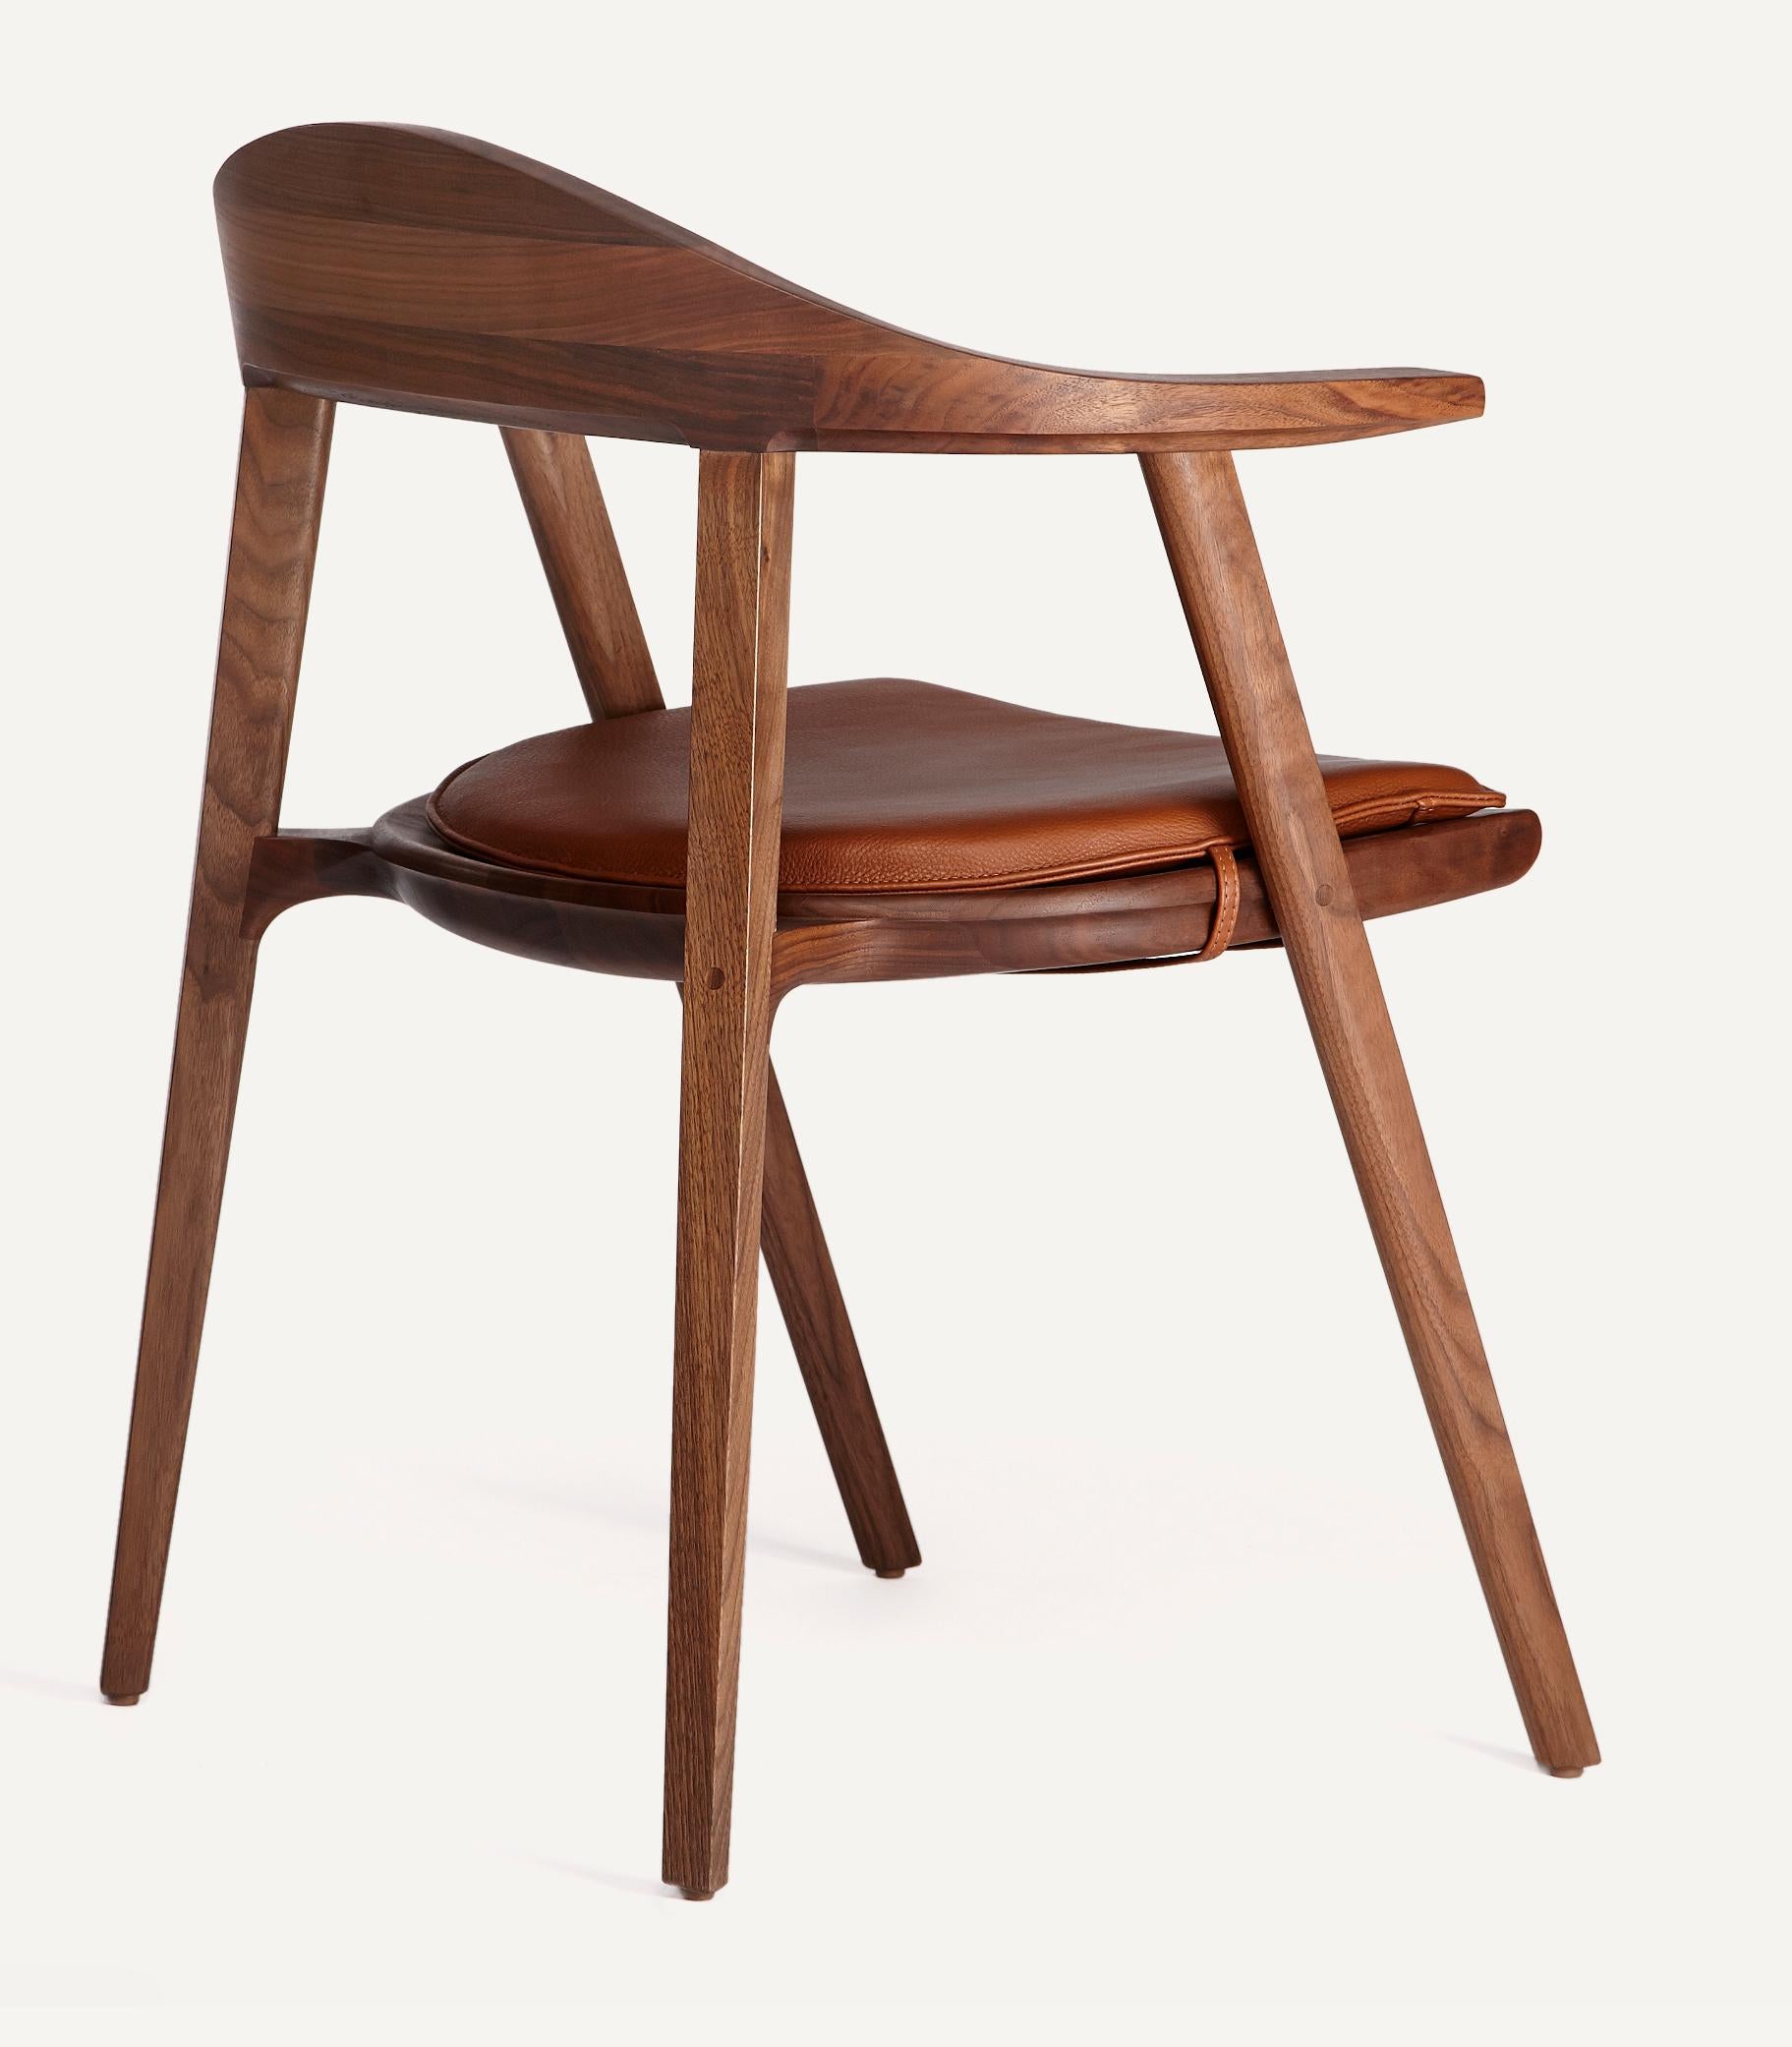 For Sale: Brown (Comfort 33286 Chestnut Brown) Mantis Chair in Solid Walnut with Leather Cushion Designed by Craig Bassam 2